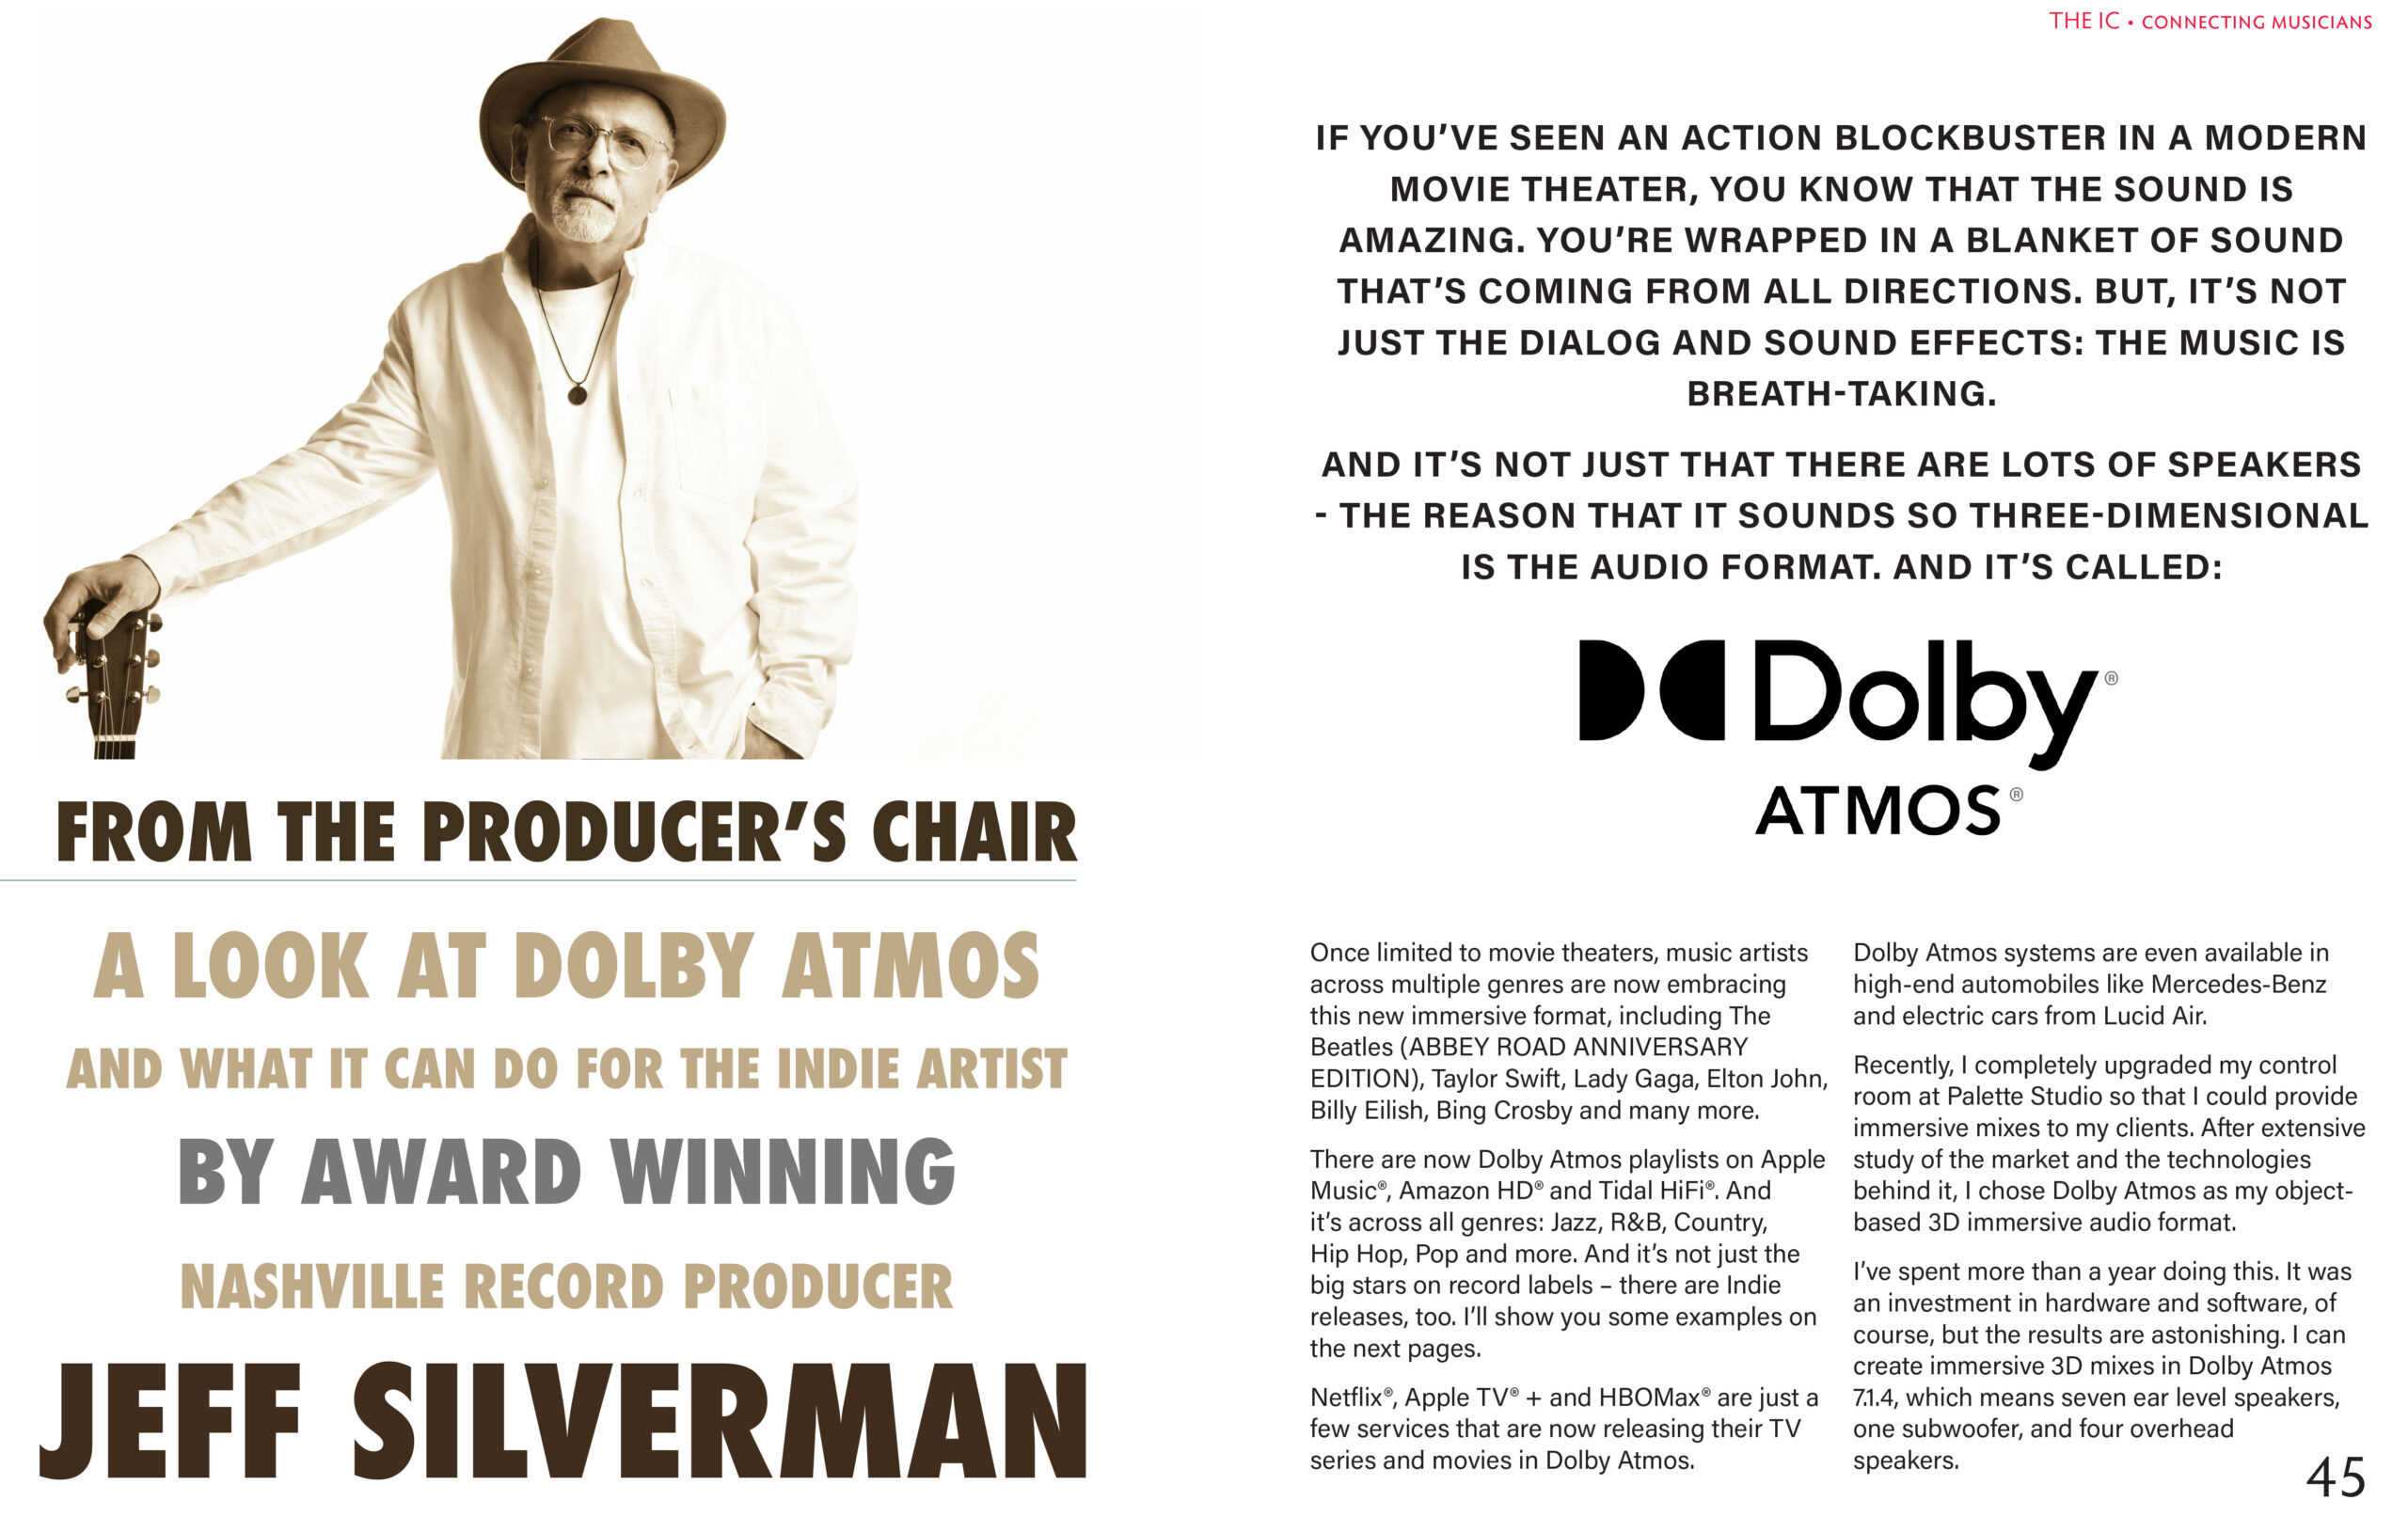 PAGE 1 - WHY DOLBY ATMOS -JEFF SILVERMAN - THE IC 2022 Article - PALETTE MUSIC STUDIO PRODUCTIONS- NASHVILLE TN